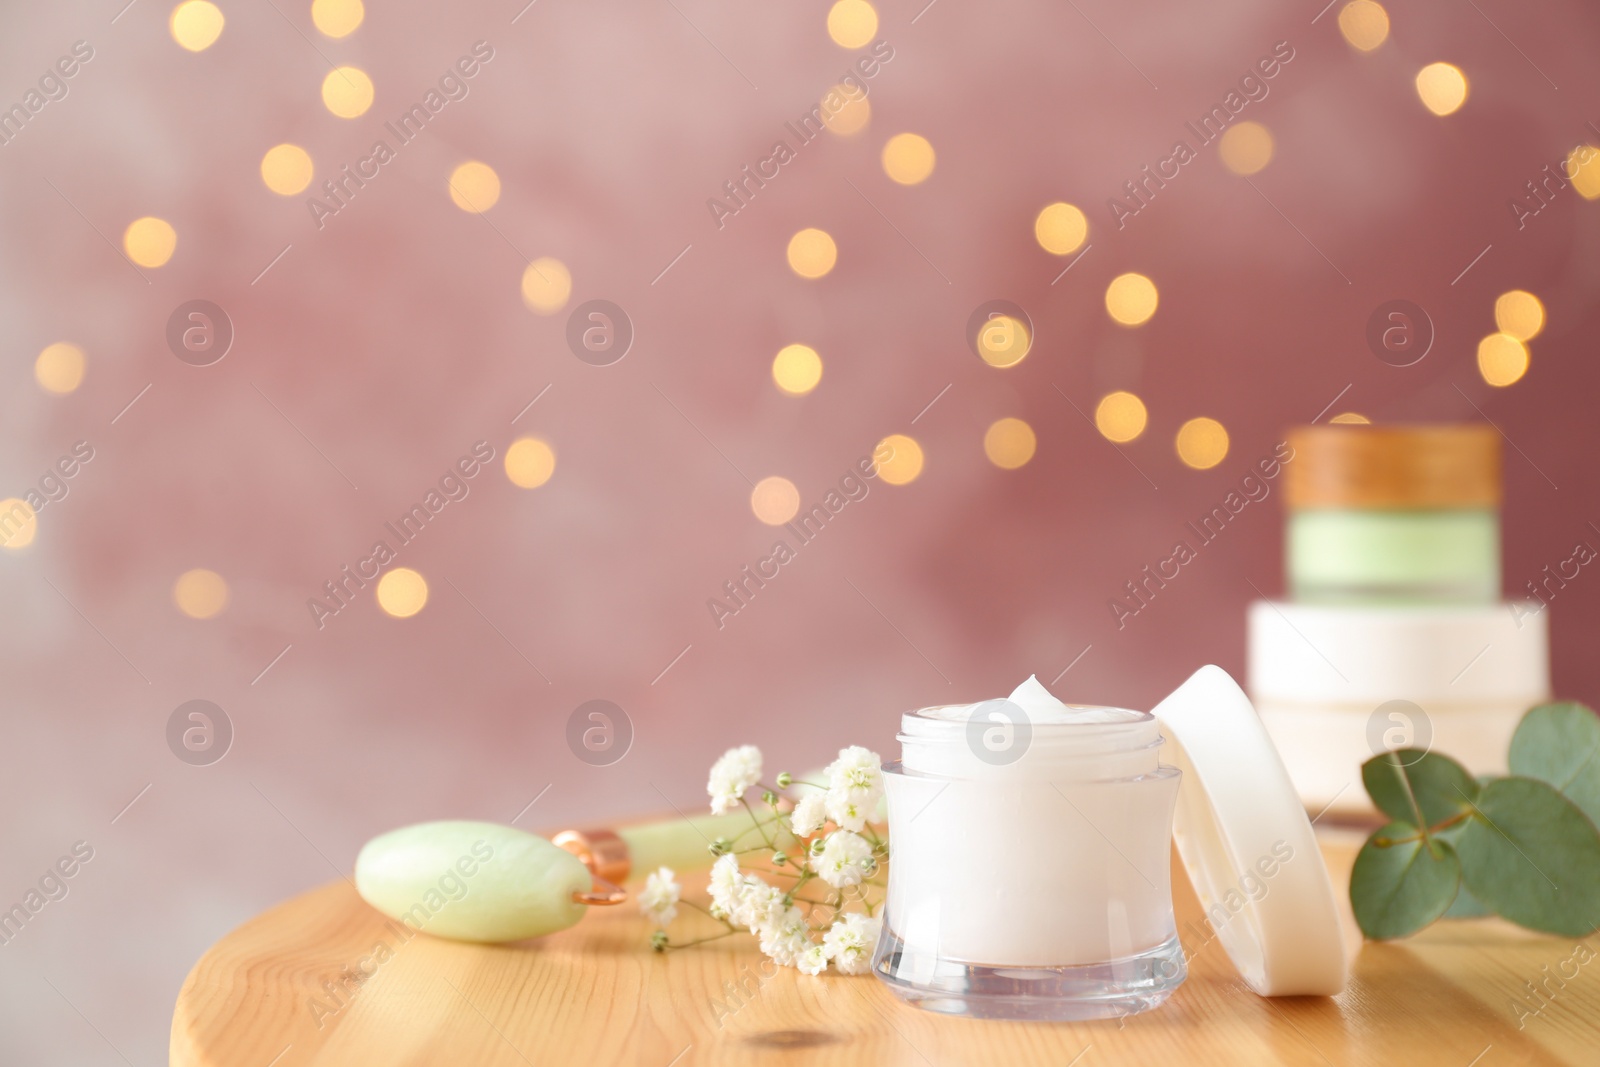 Photo of Natural face roller, cosmetic product and beautiful flowers on wooden table against blurred lights, space for text